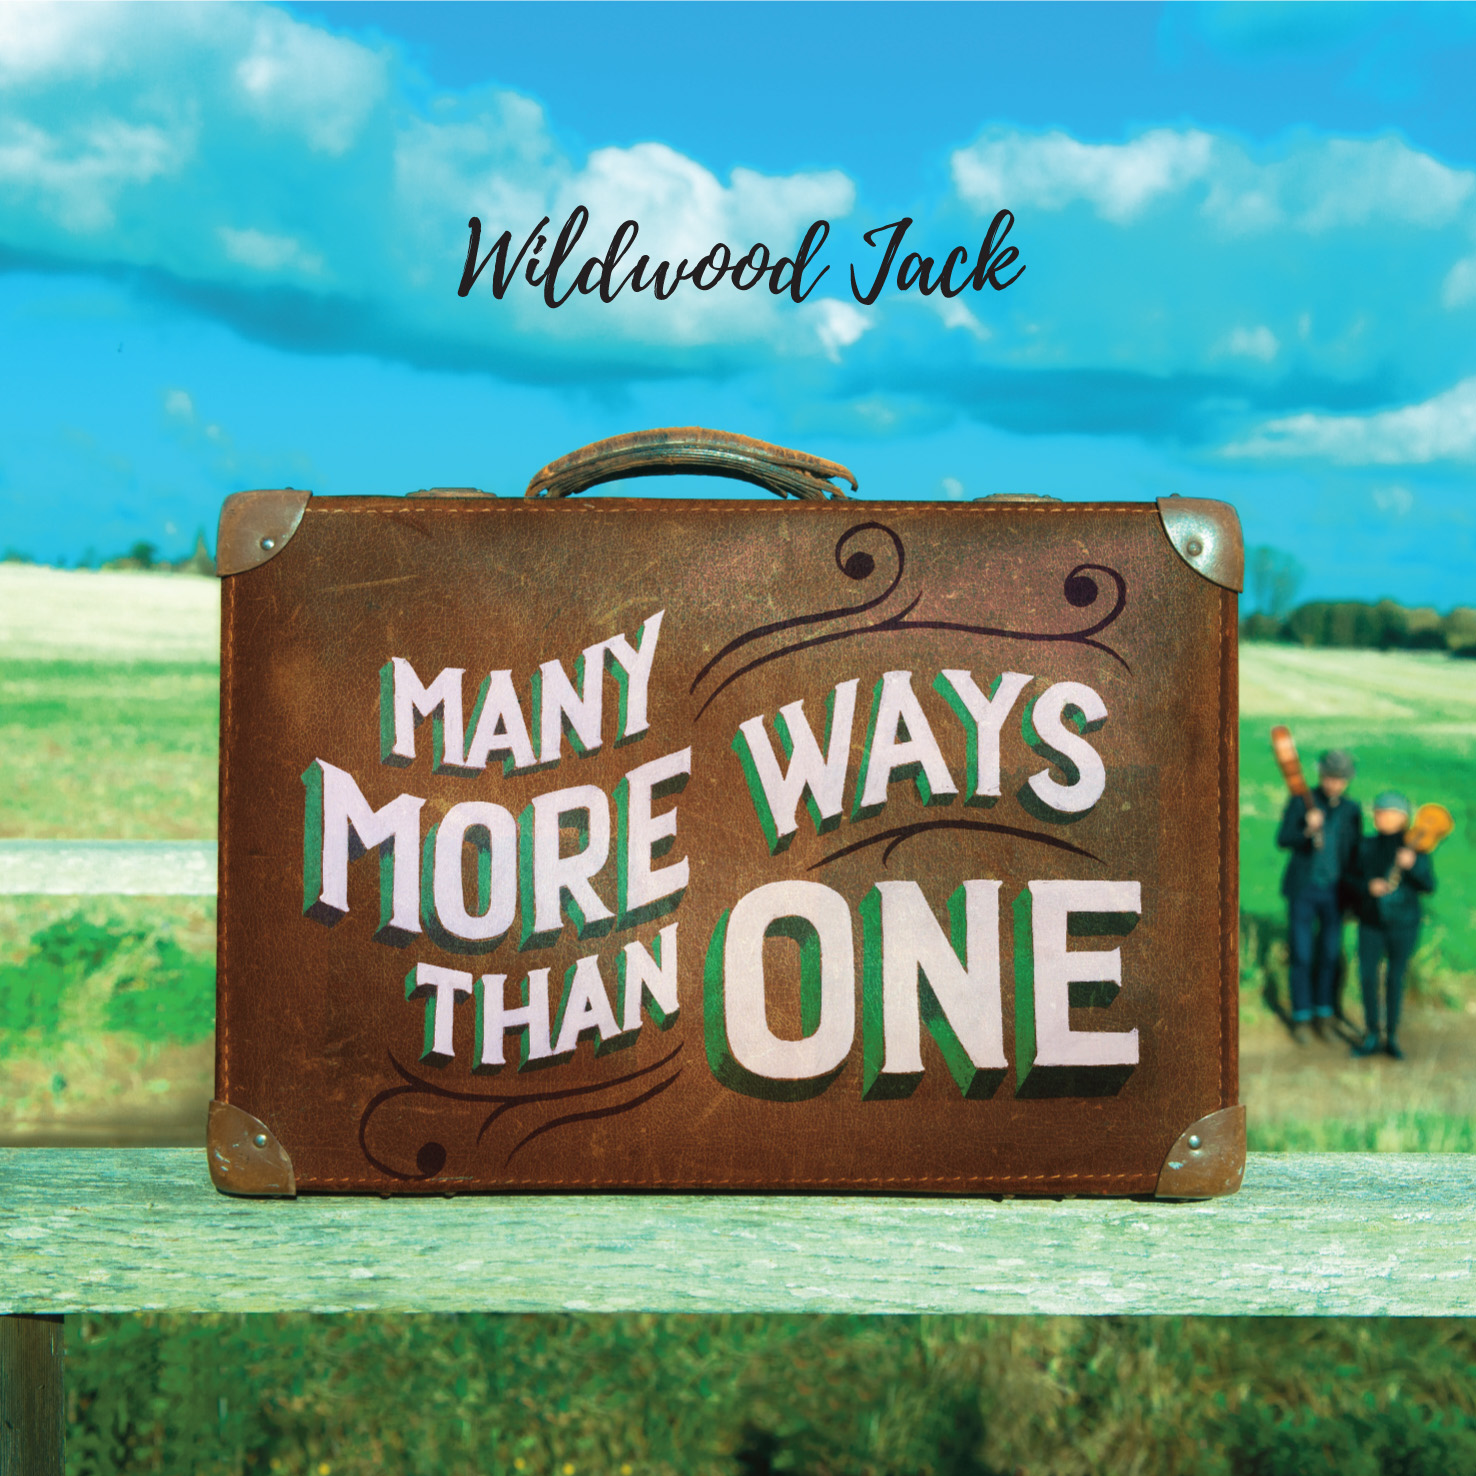 Album Cover for the New Album 'Many More Ways Than One'